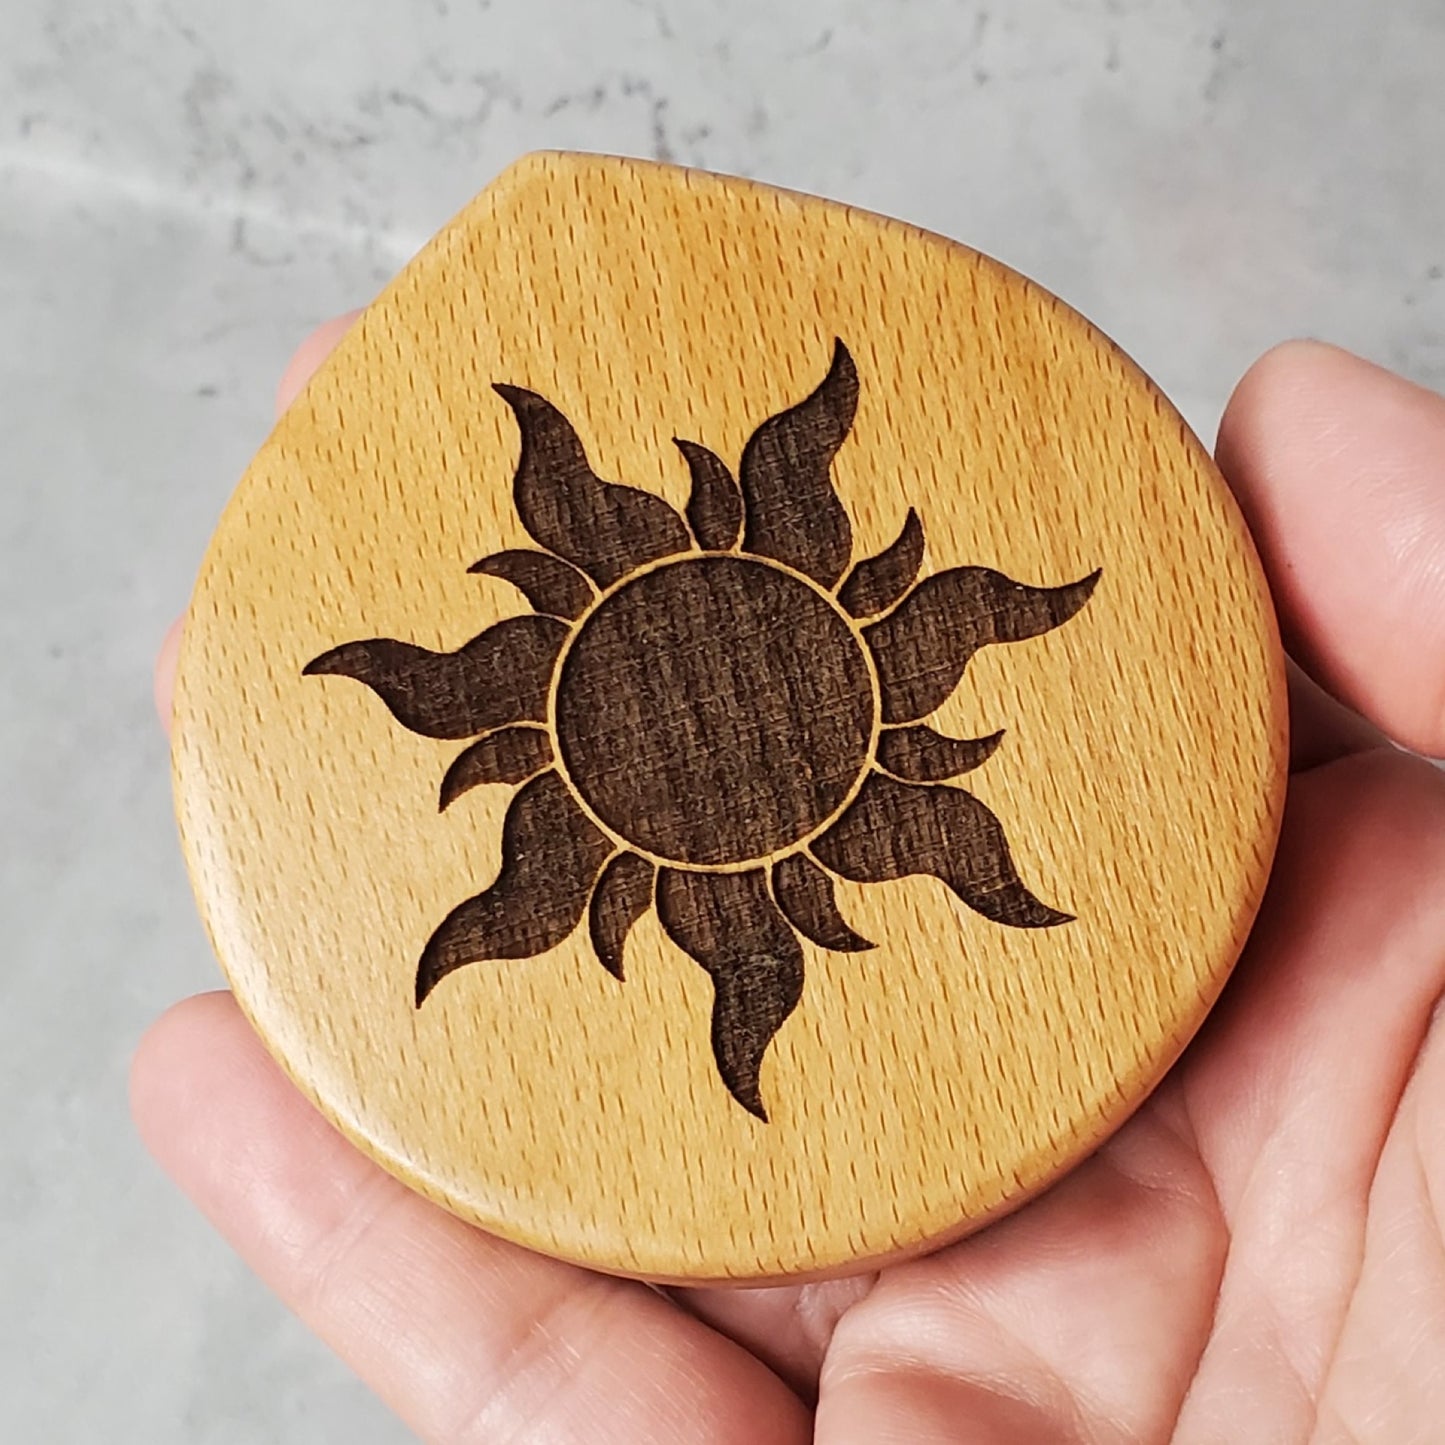 compact mirror with a sun engraved on the top, made out of maple wood and it fits into your hand, purse or pocket. Perfect gift for little girls as well